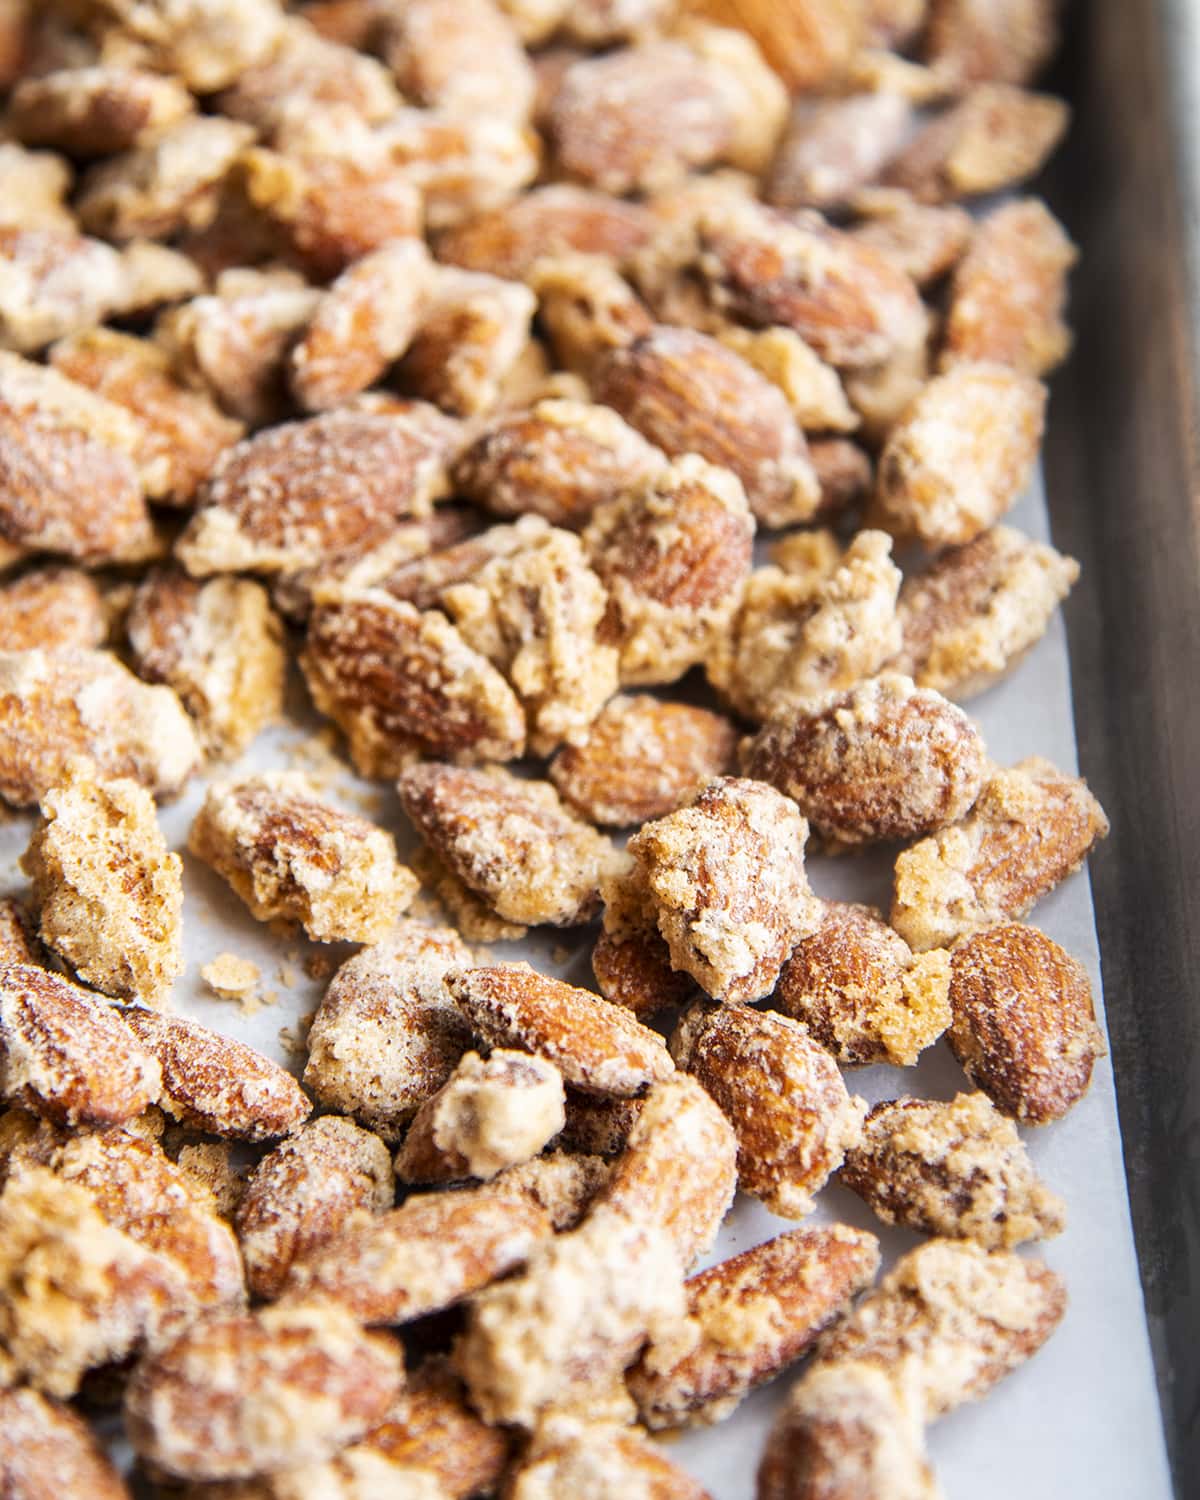 Candied almonds on a baking sheet.